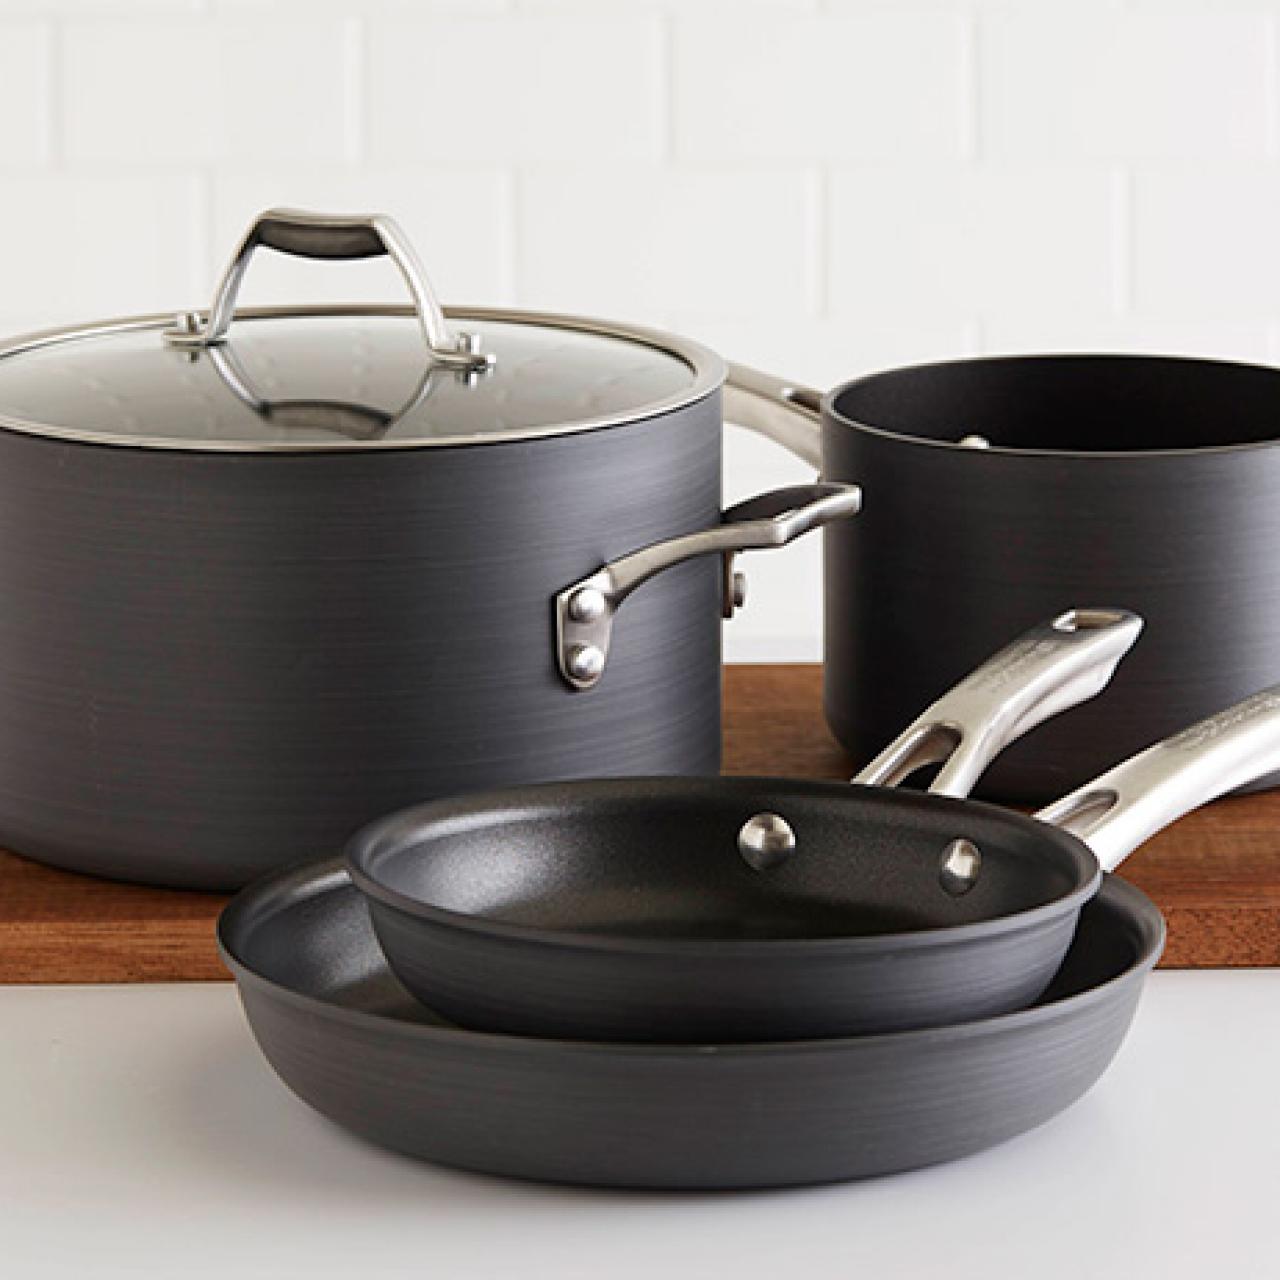 Cast Iron vs Nonstick Cookware: Why You Need Both